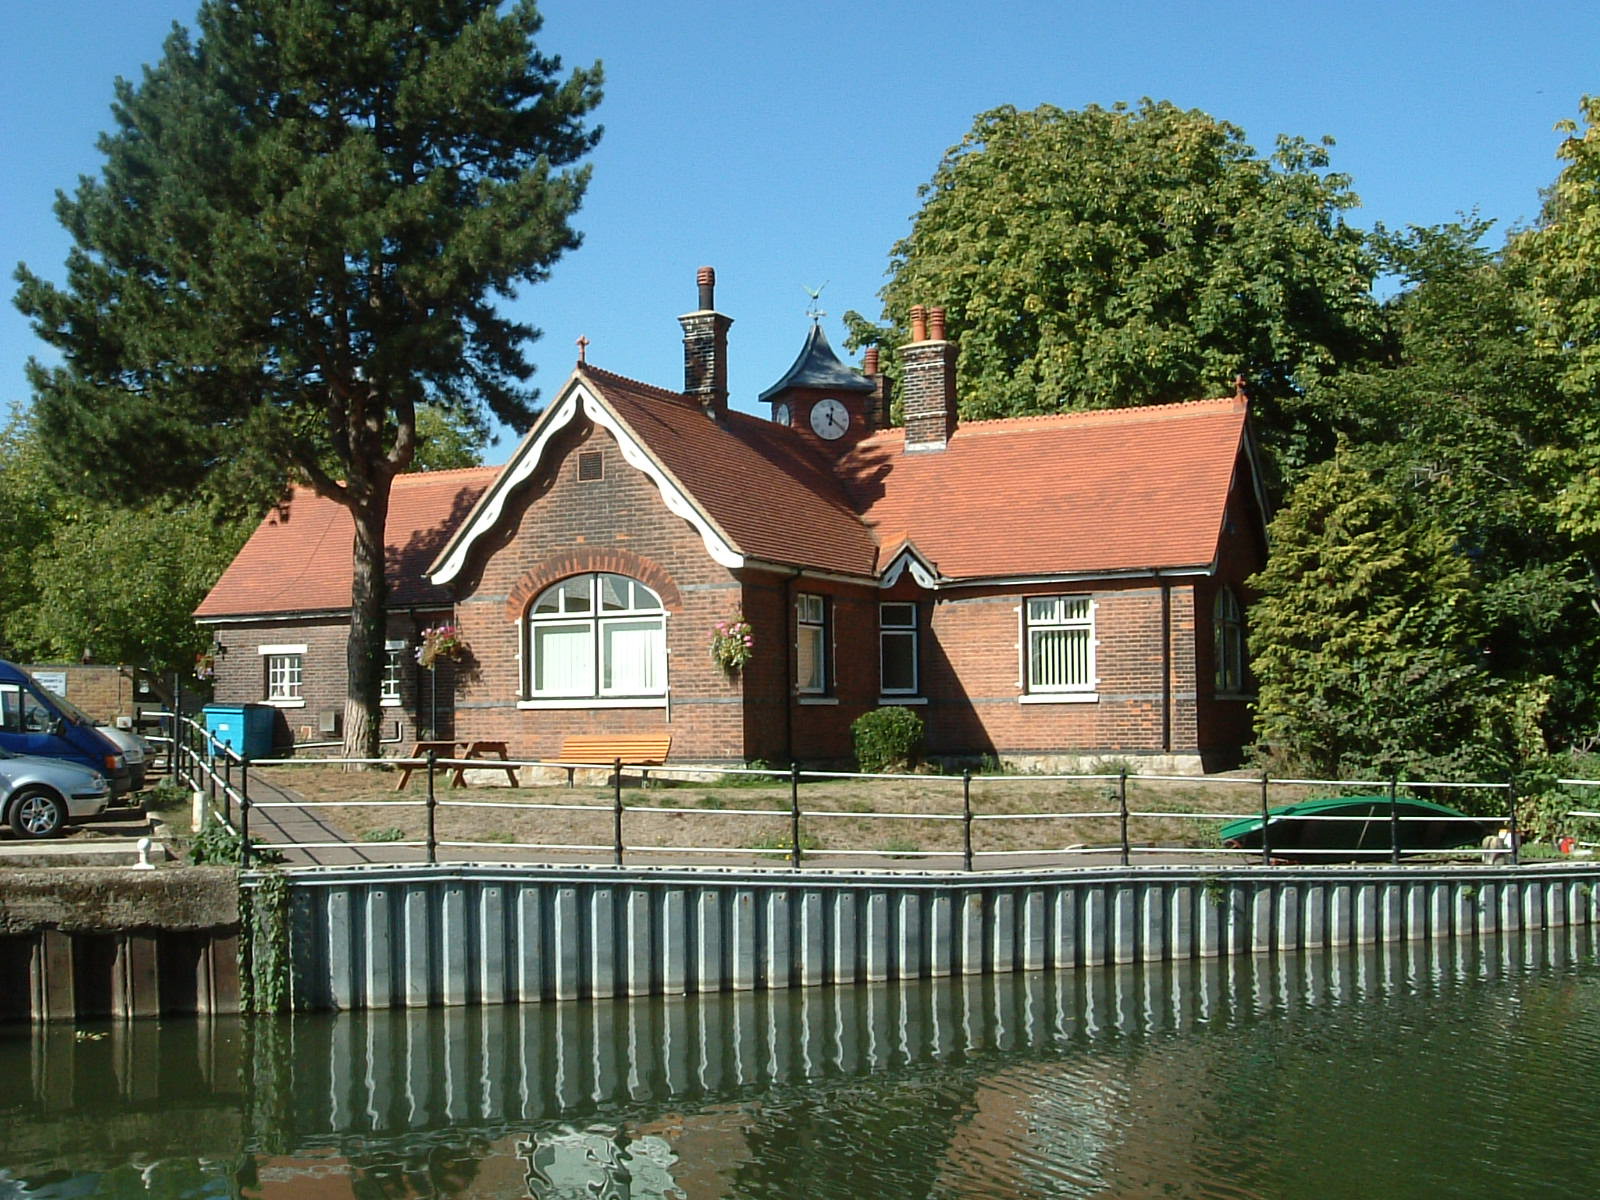 A house by the River Lea